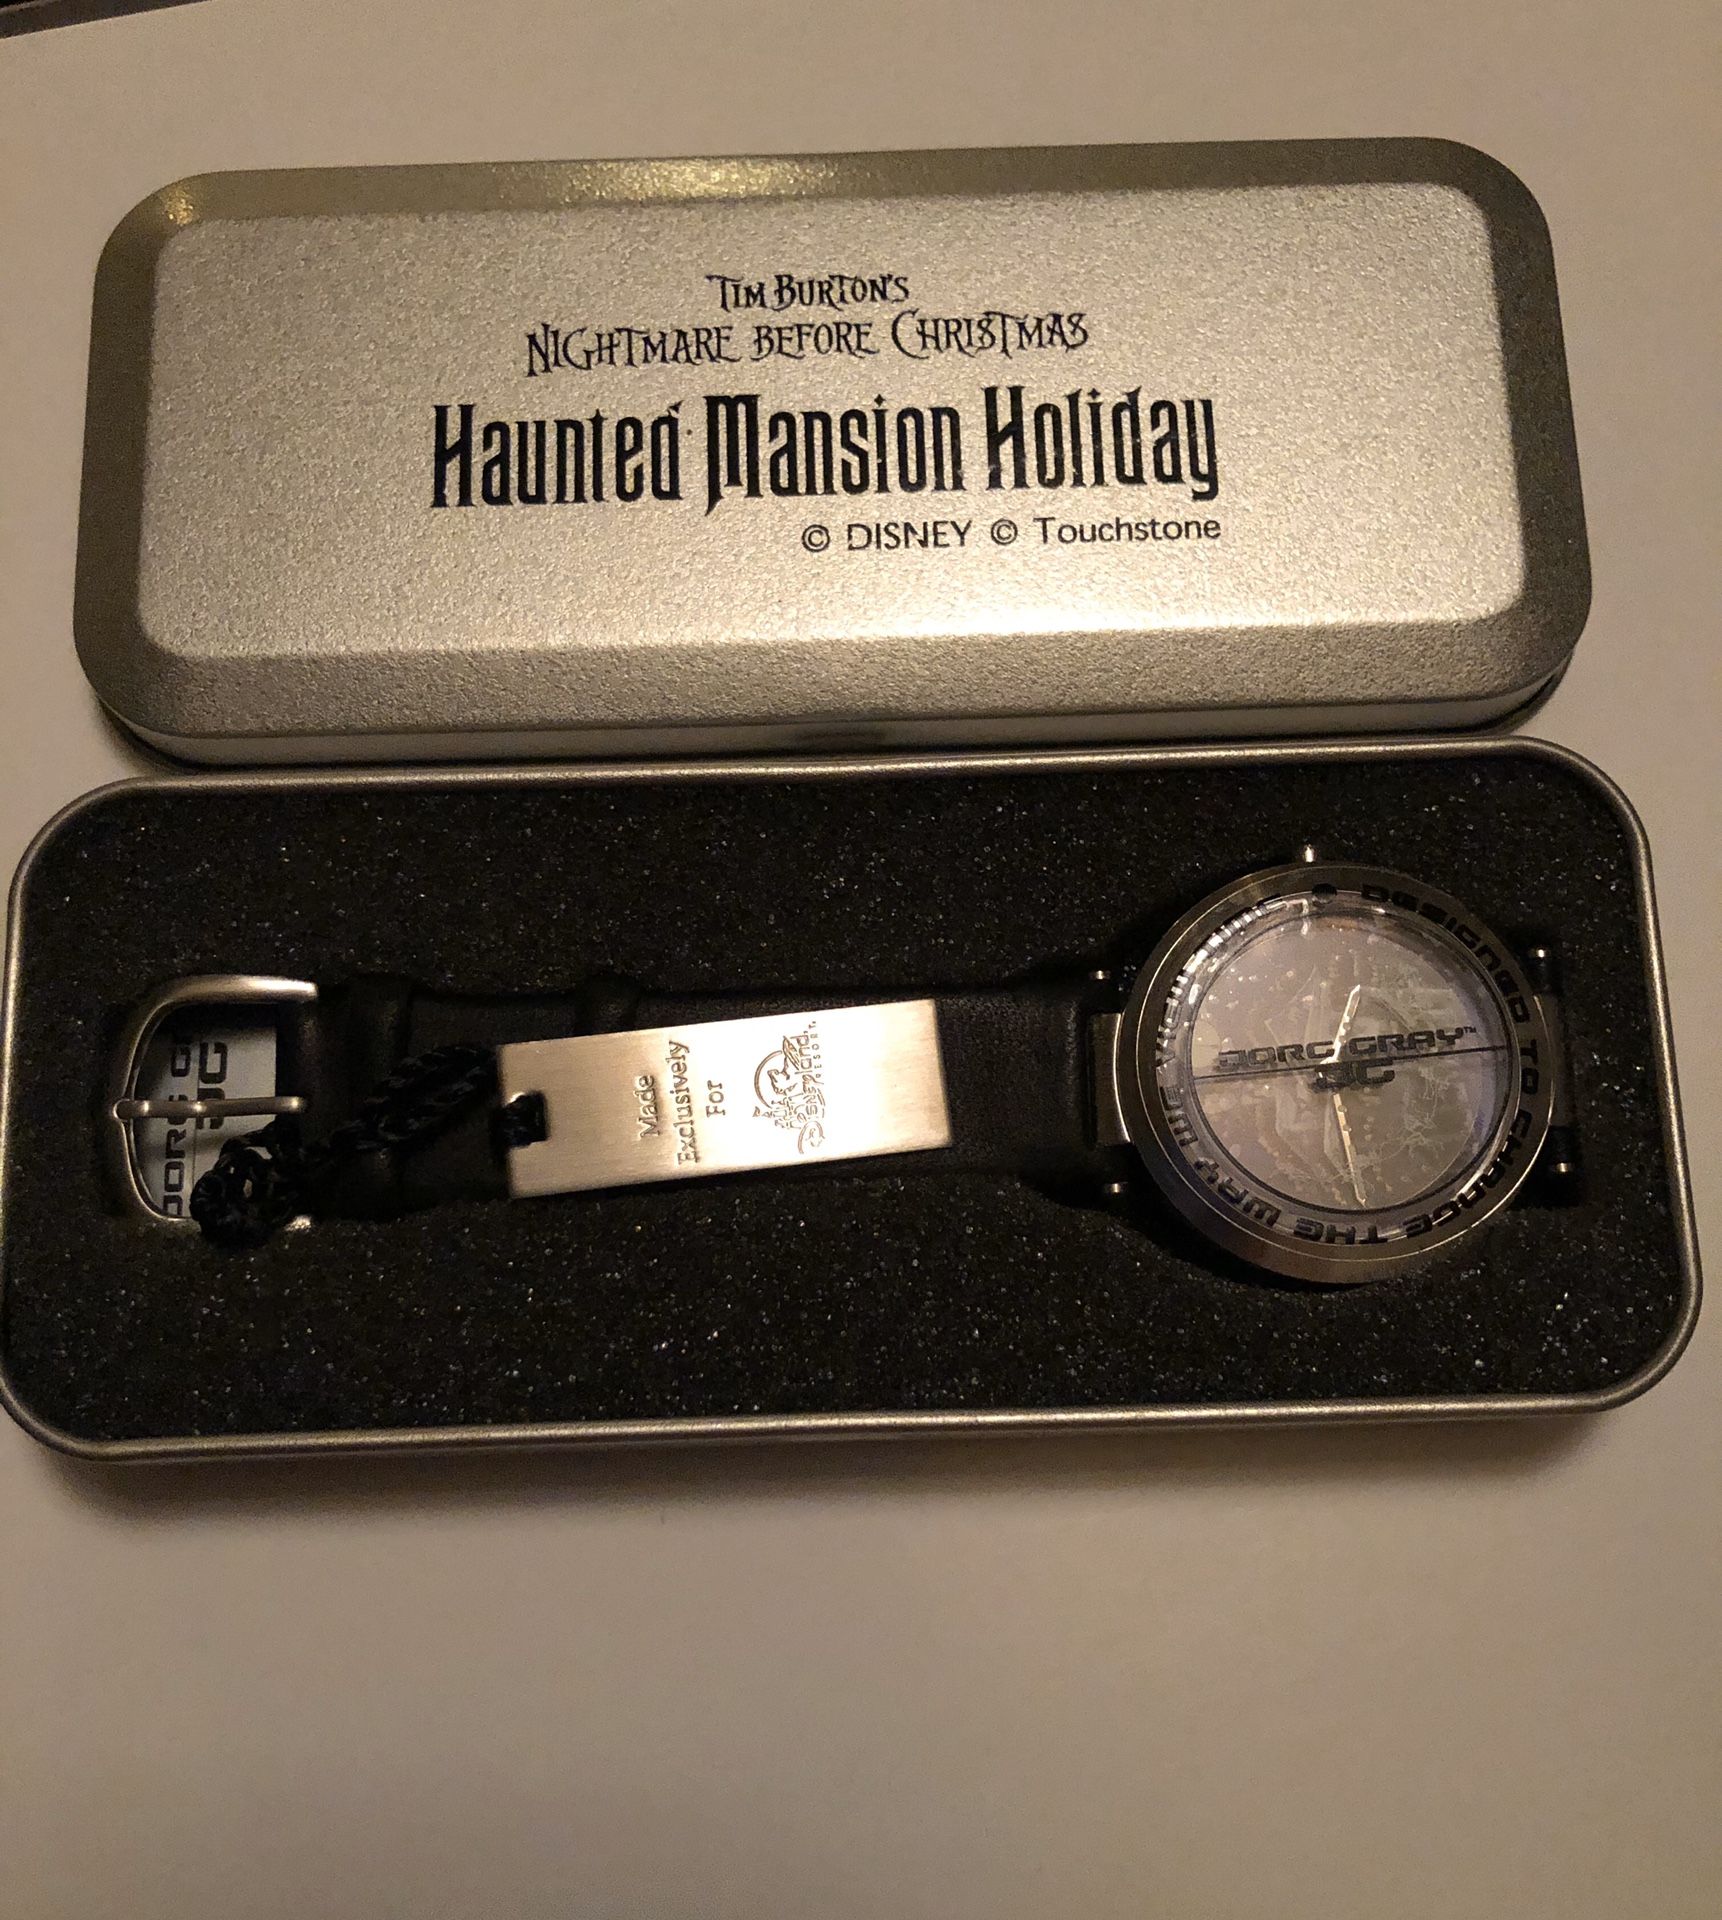 Haunted Mansion Holiday Nightmare Before Christmas Watch